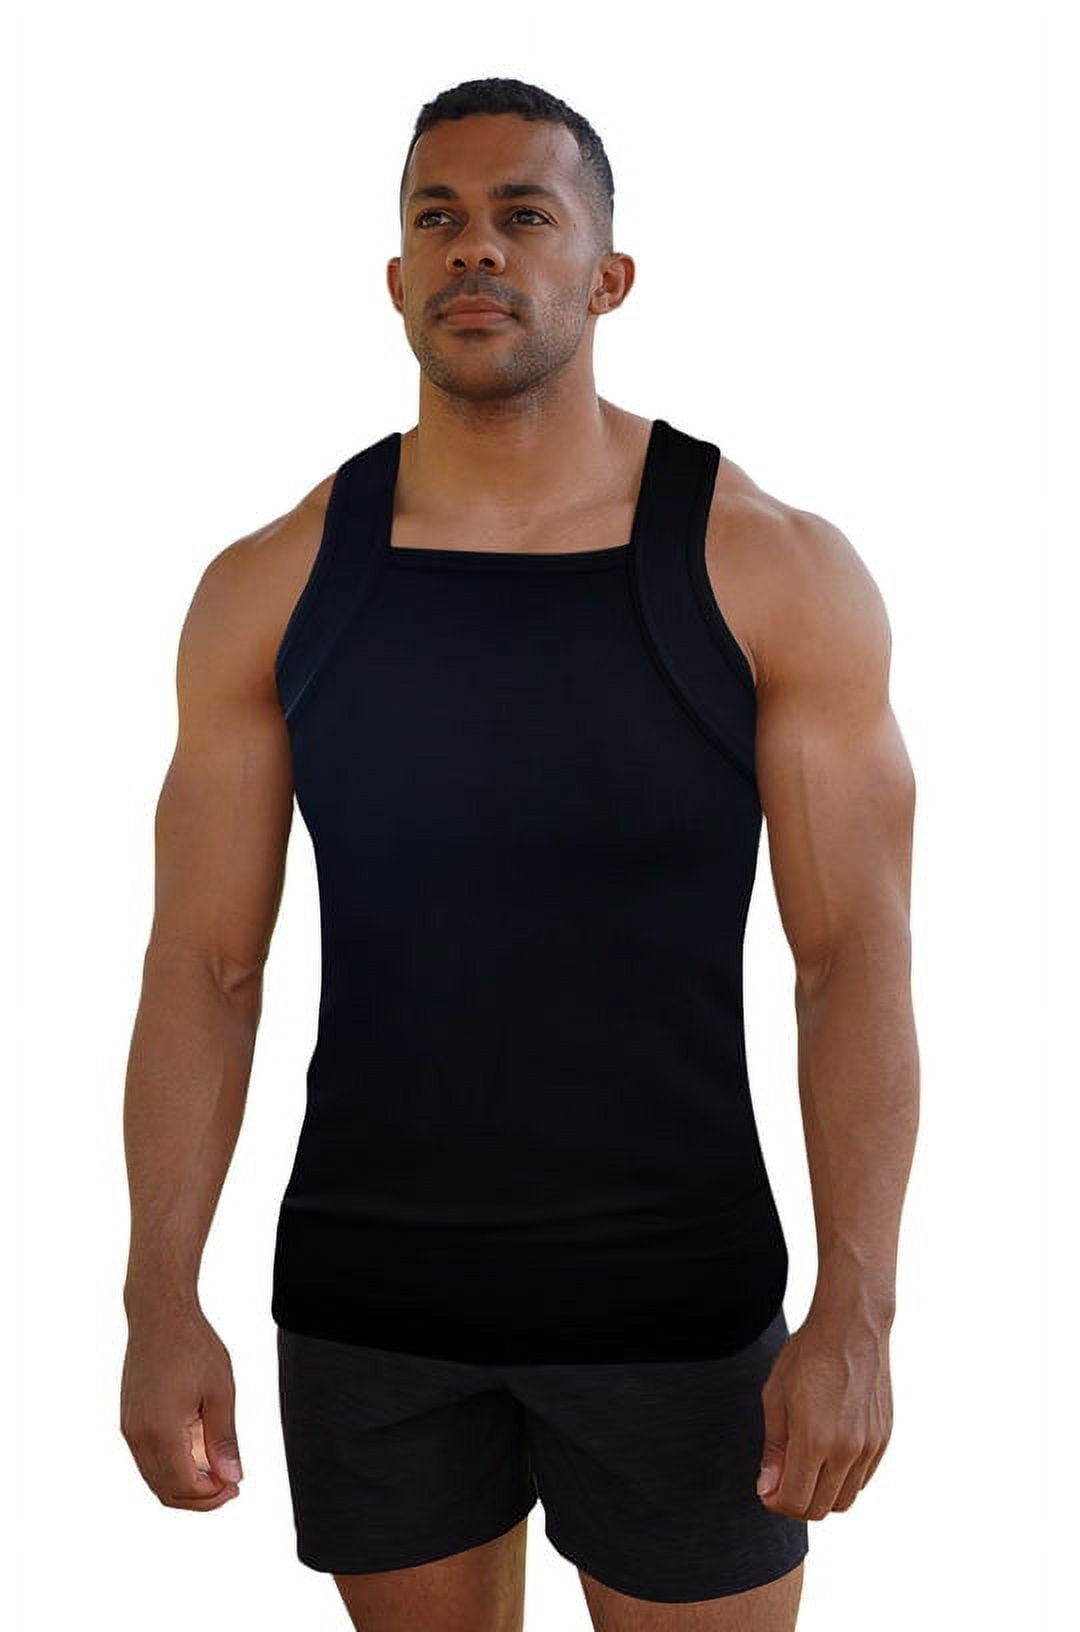 Different Touch Men's G-unit Style Tank Tops Square Cut Muscle A-Shirts